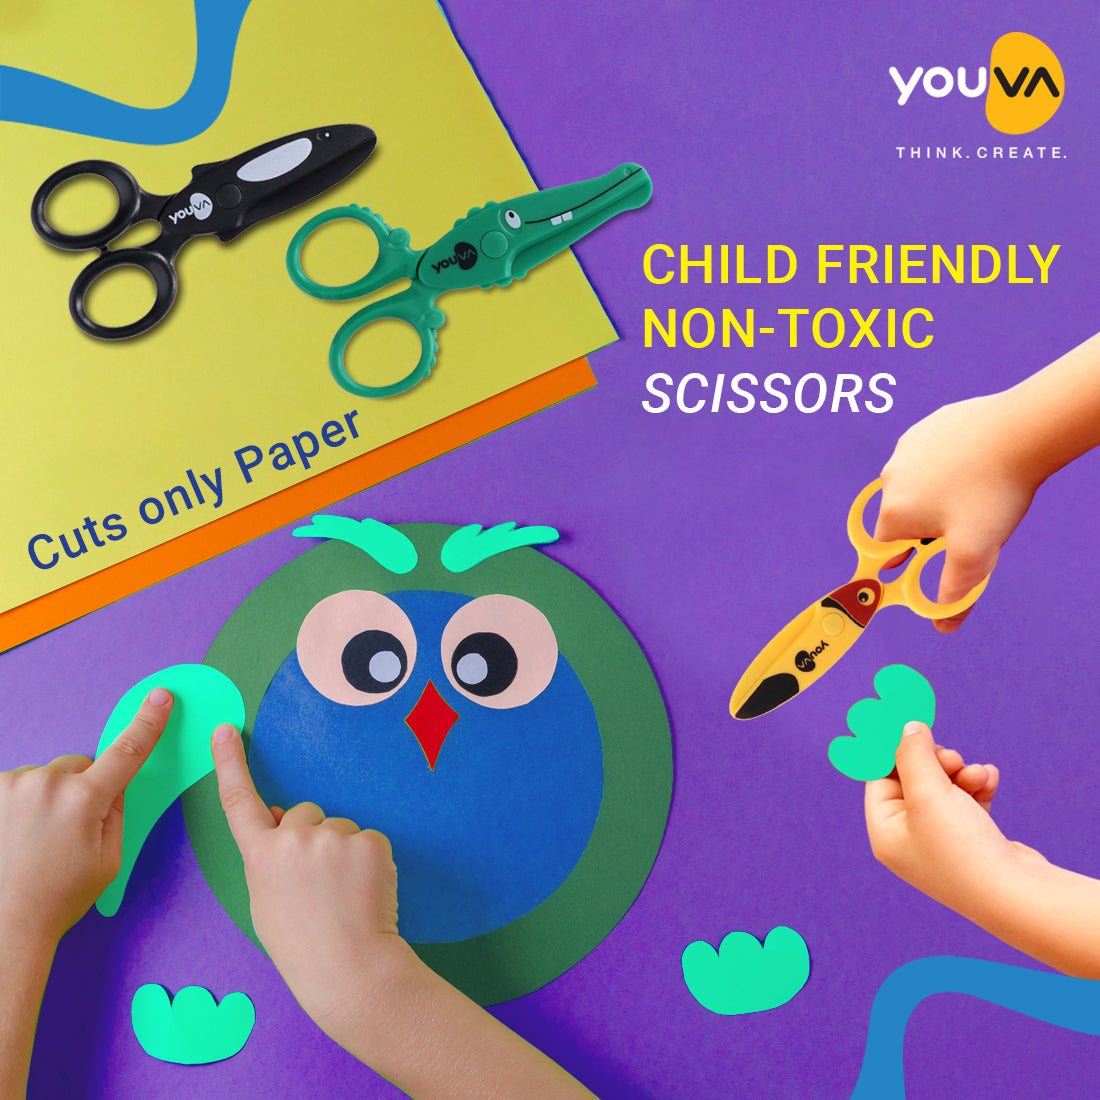 Navneet Youva | Scissors Assorted Shapes - Age group 6-9 years | Safe for kids | Pack of 1 | 3 Shapes - Crocodile, Acua Whale, Toucan